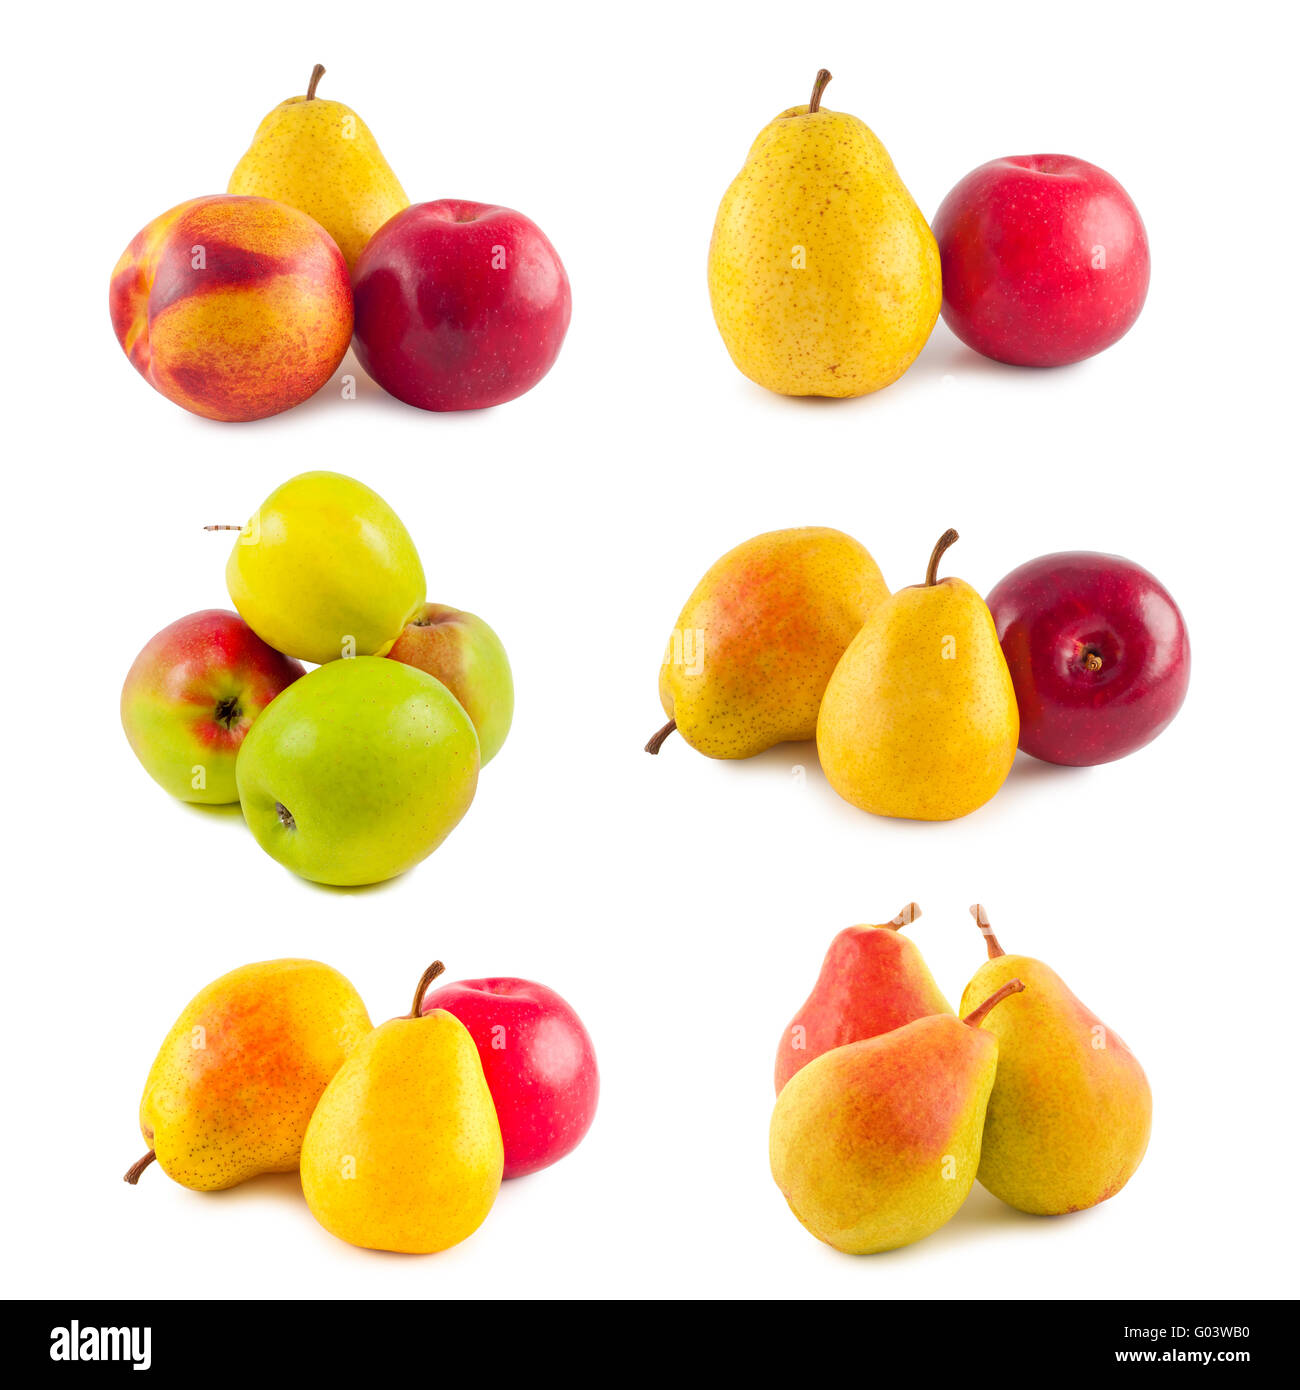 Set fruit apples and pears on white background. Stock Photo